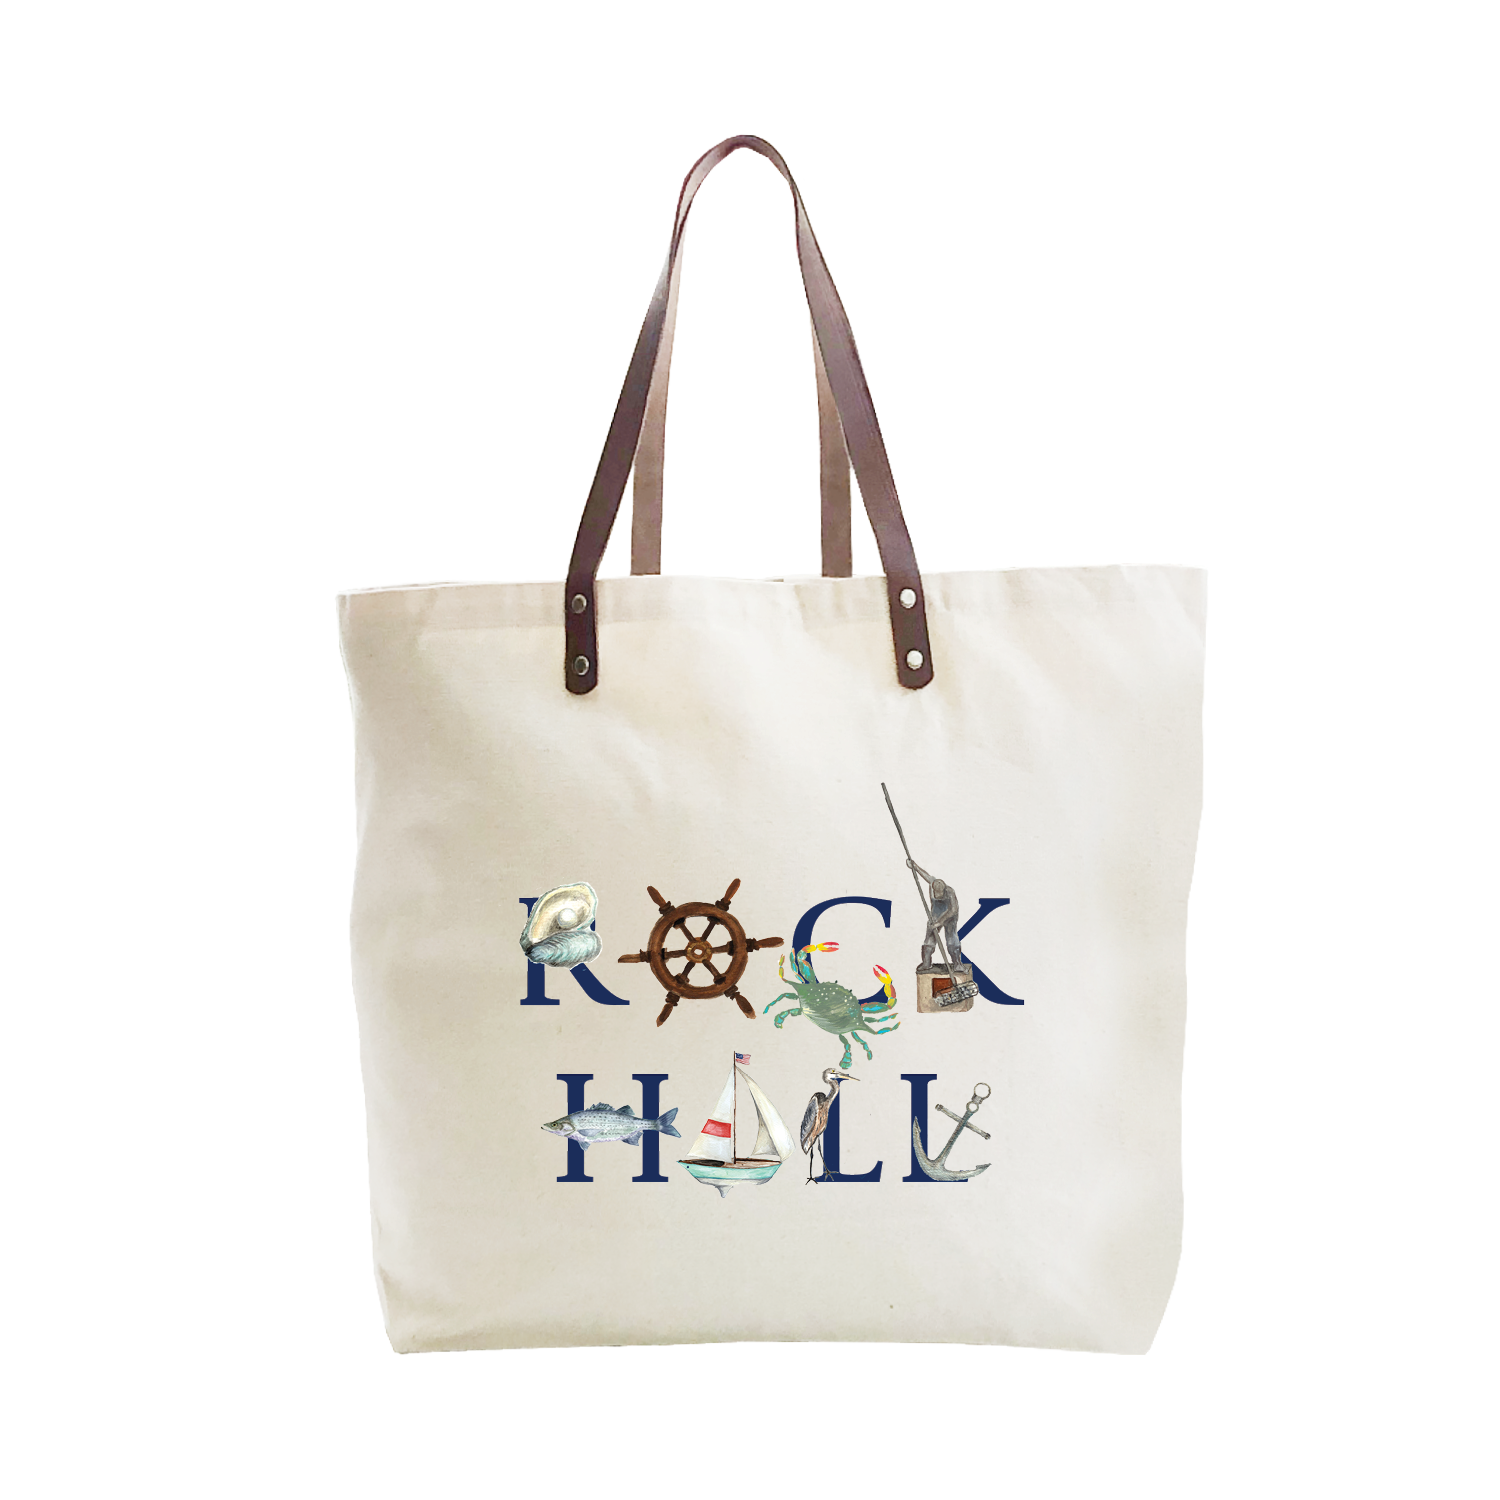 rock hall large tote